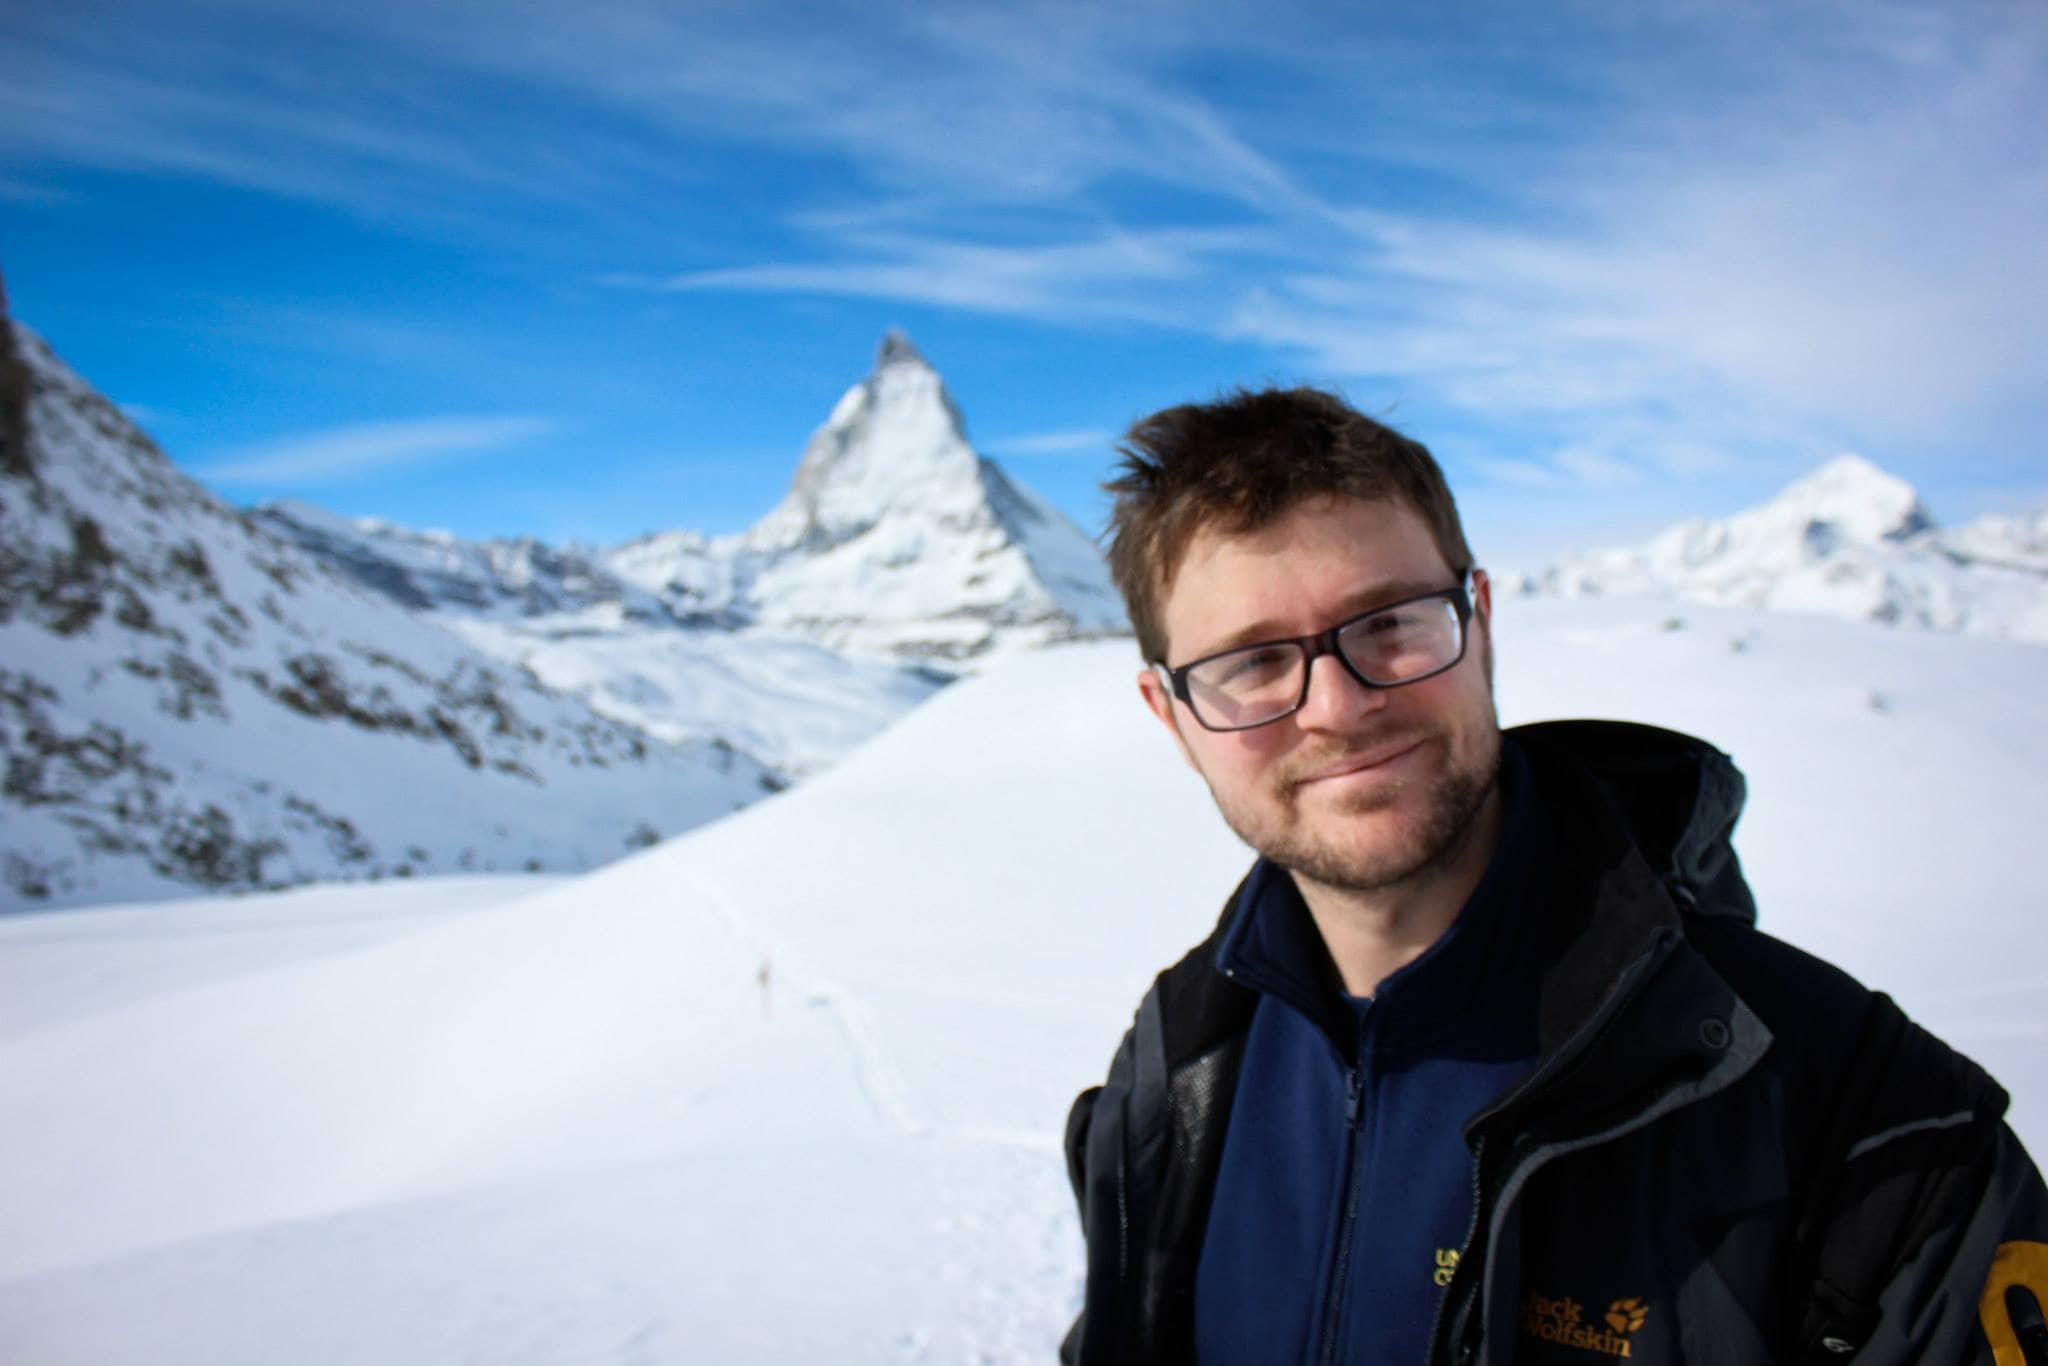 White male posed in front of a snowy mountain